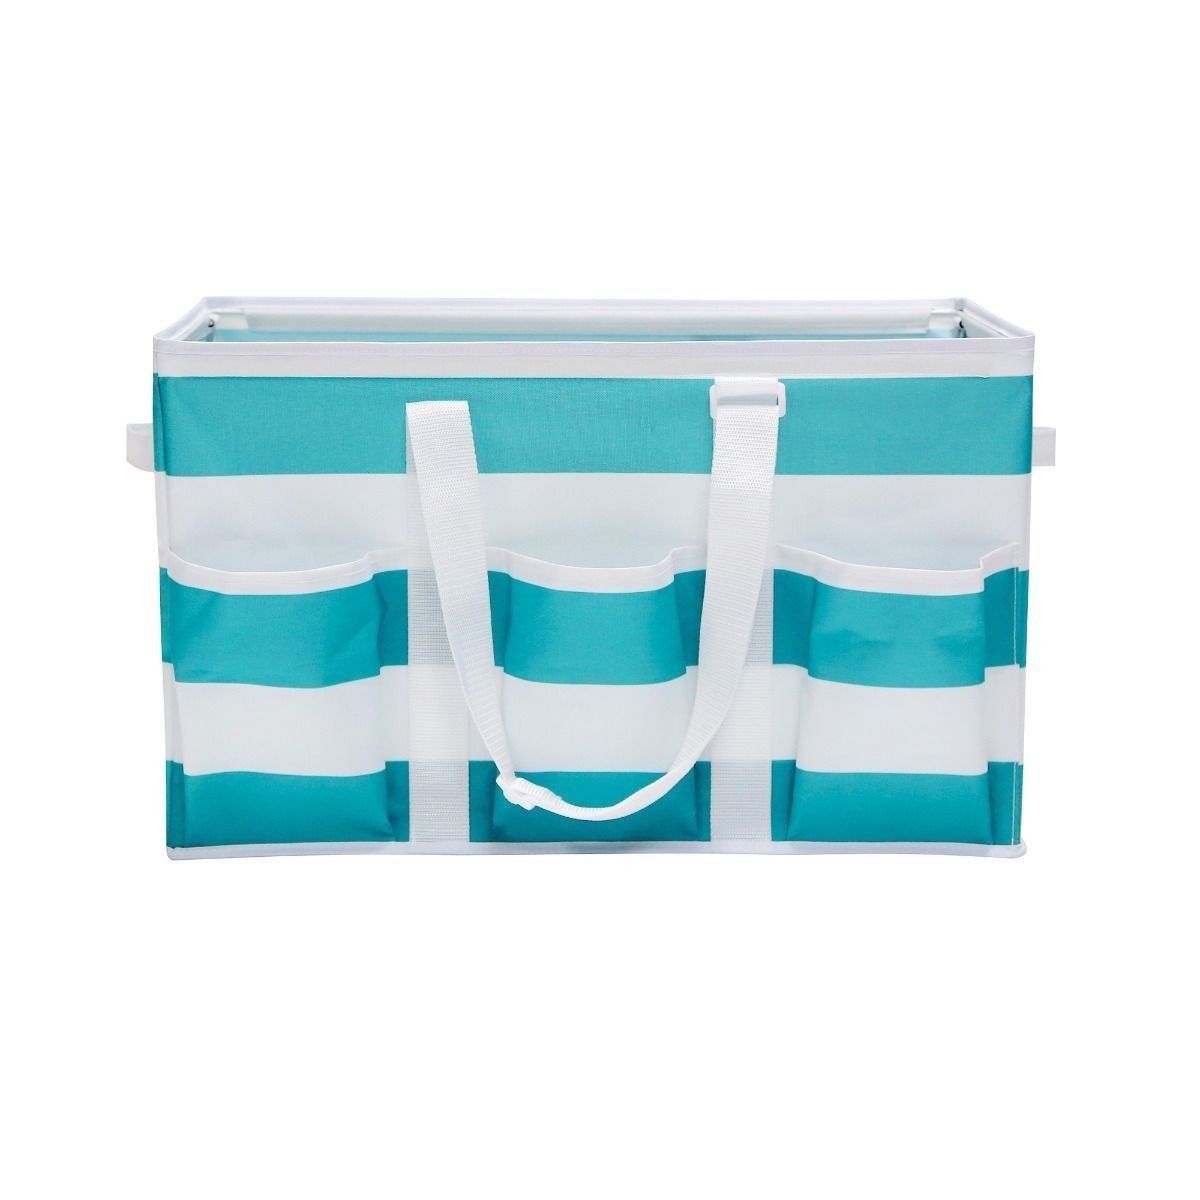 Tidy Living - Utility Tote Teal Rugby Stripe - Multipurpose Storage Solution Bag - image 3 of 5